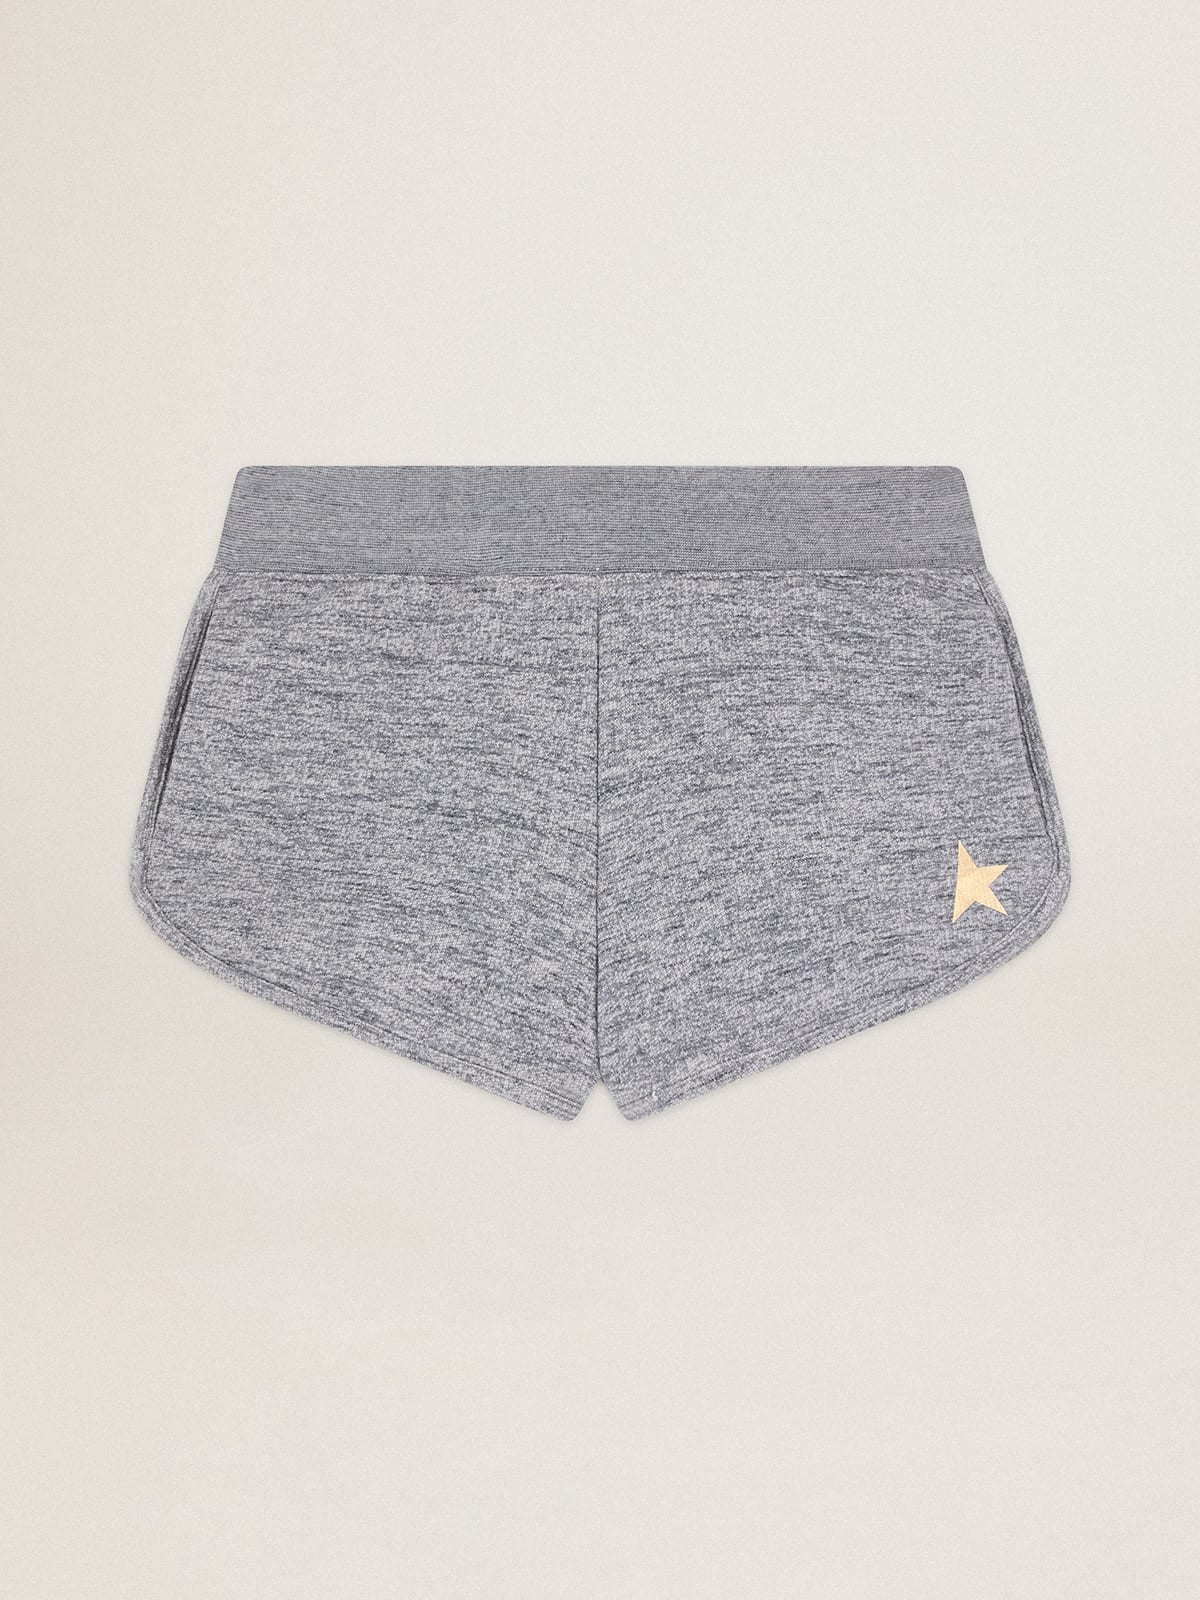 Melange gray shorts with gold star